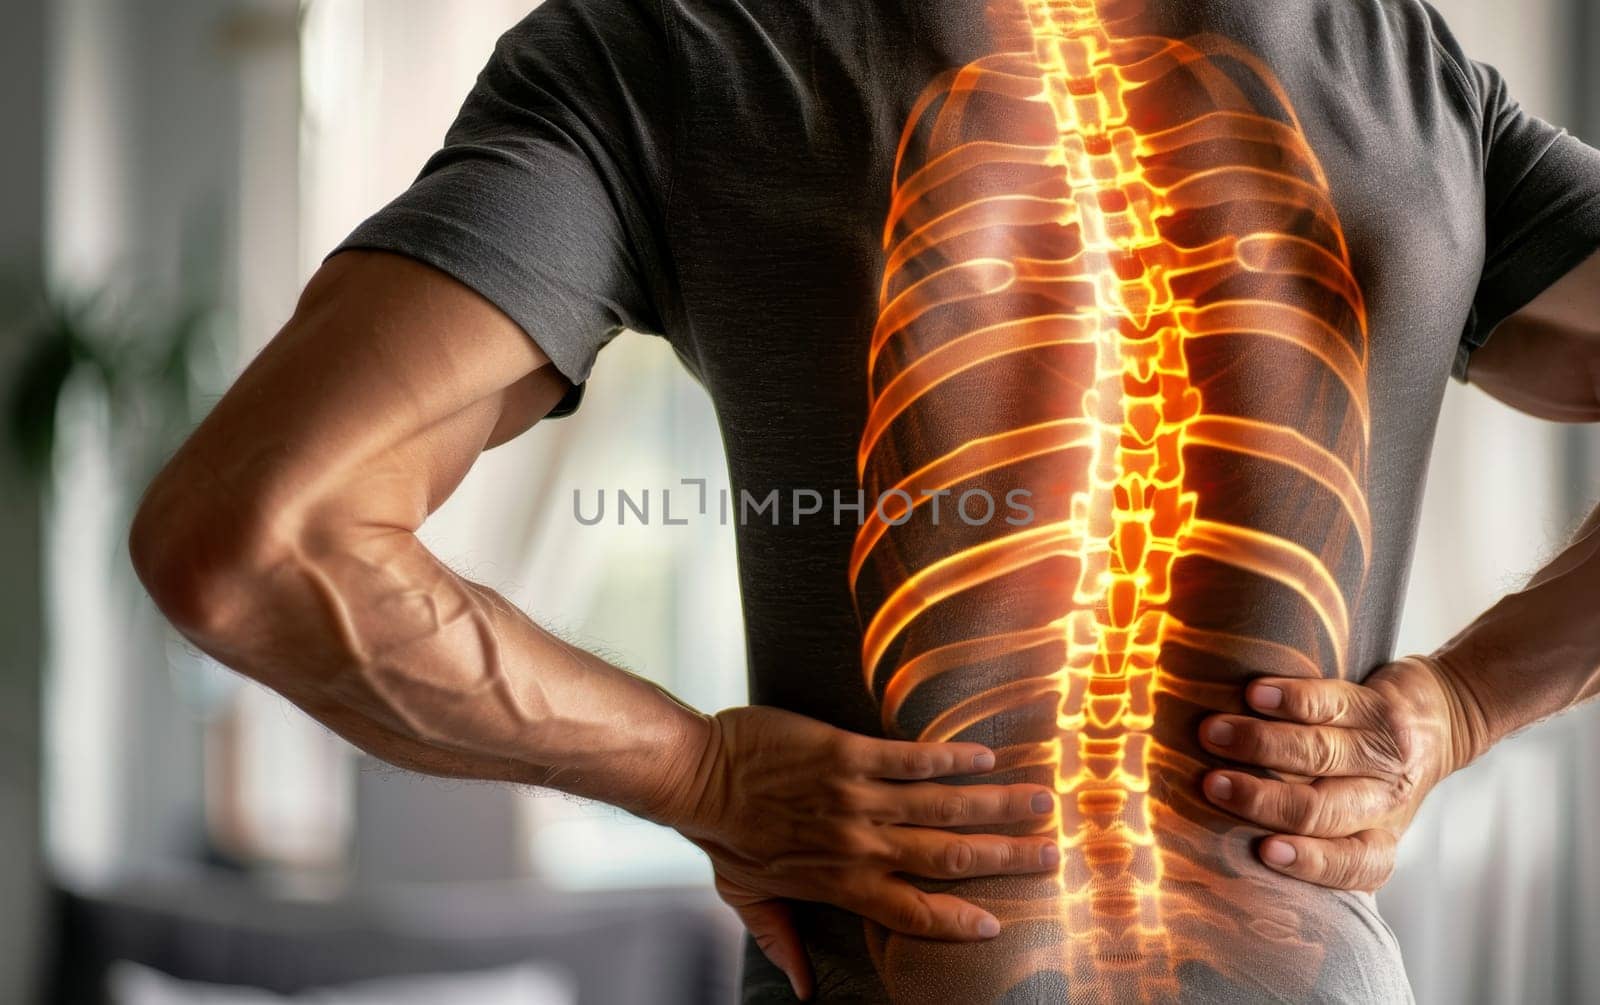 A man is clutching his lower back in pain, with a vivid illustration of a glowing spine superimposed to indicate discomfort. The image captures the struggle with back issues effectively. by sfinks